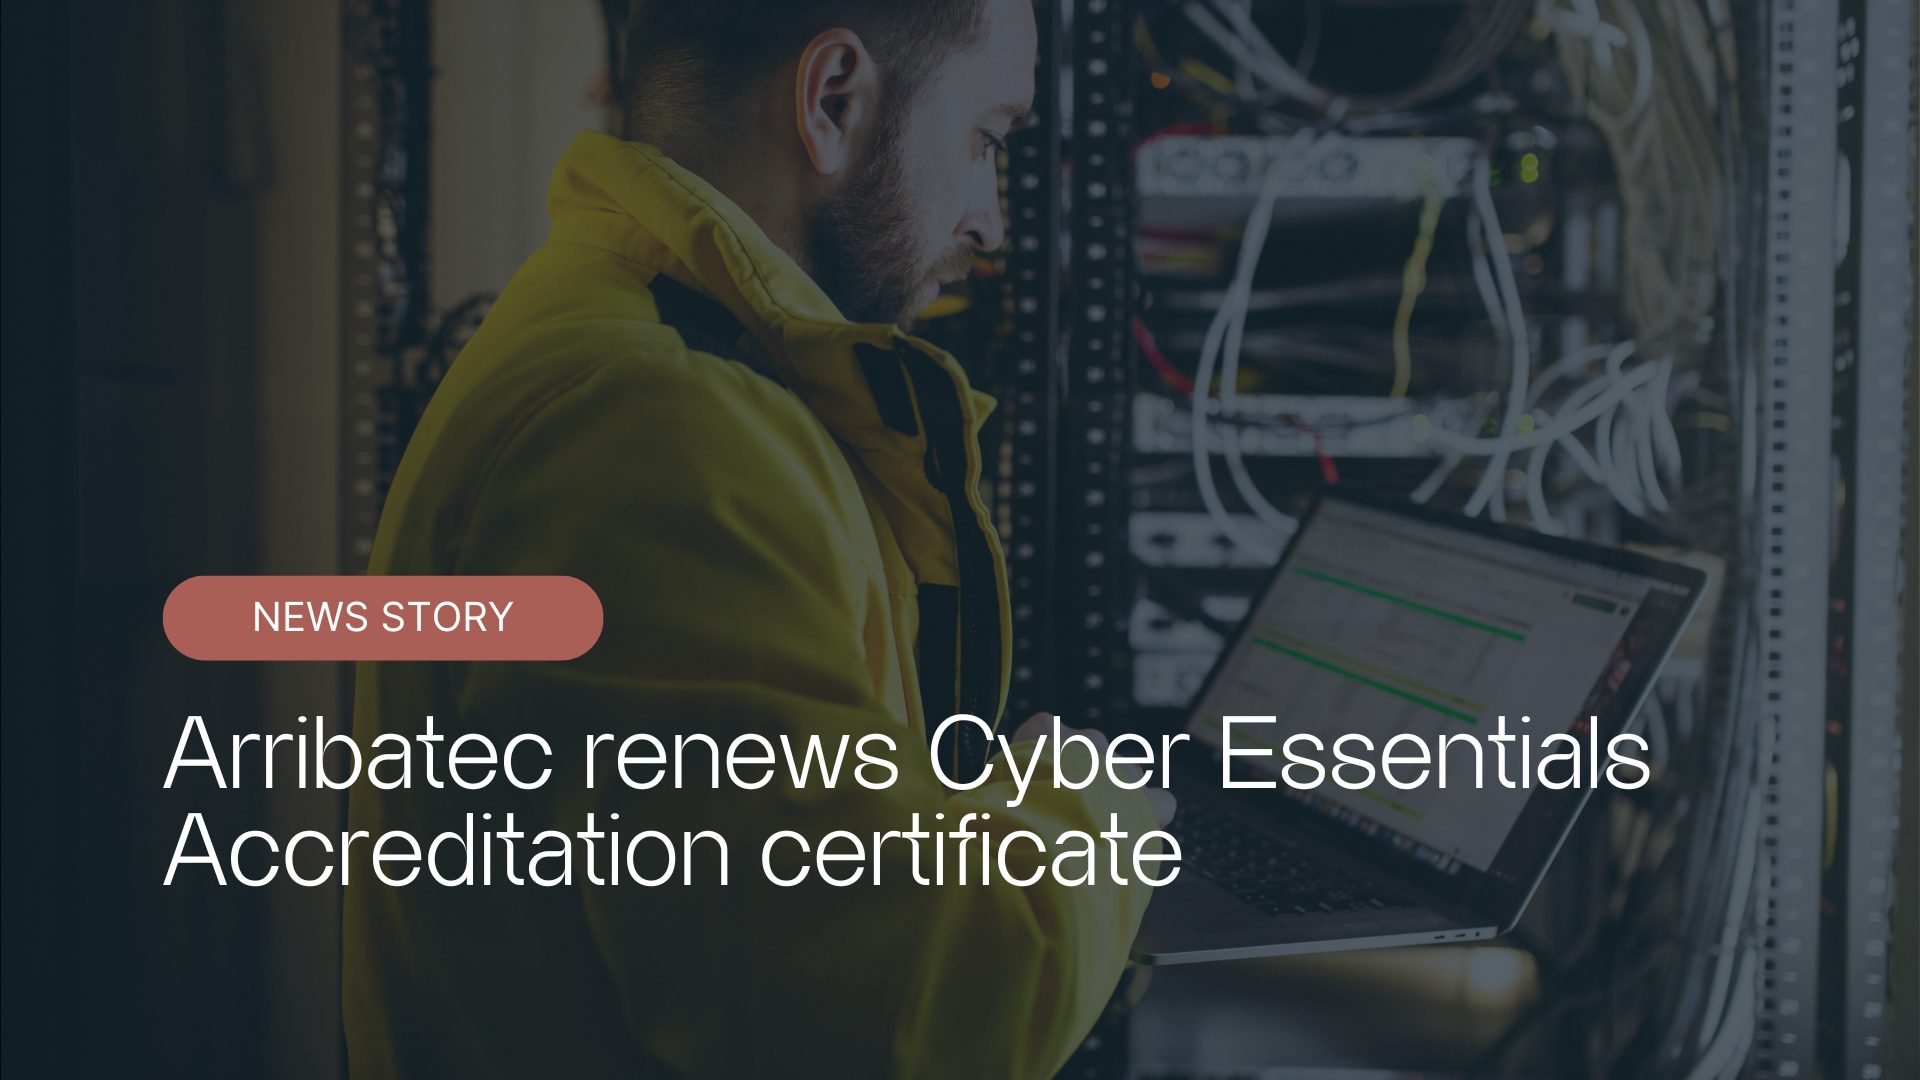 We have recently celebrated the successful renewal of our Cyber Essentials Accreditation for another year, marking a significant milestone in our ongoing commitment to cybersecurity excellence.